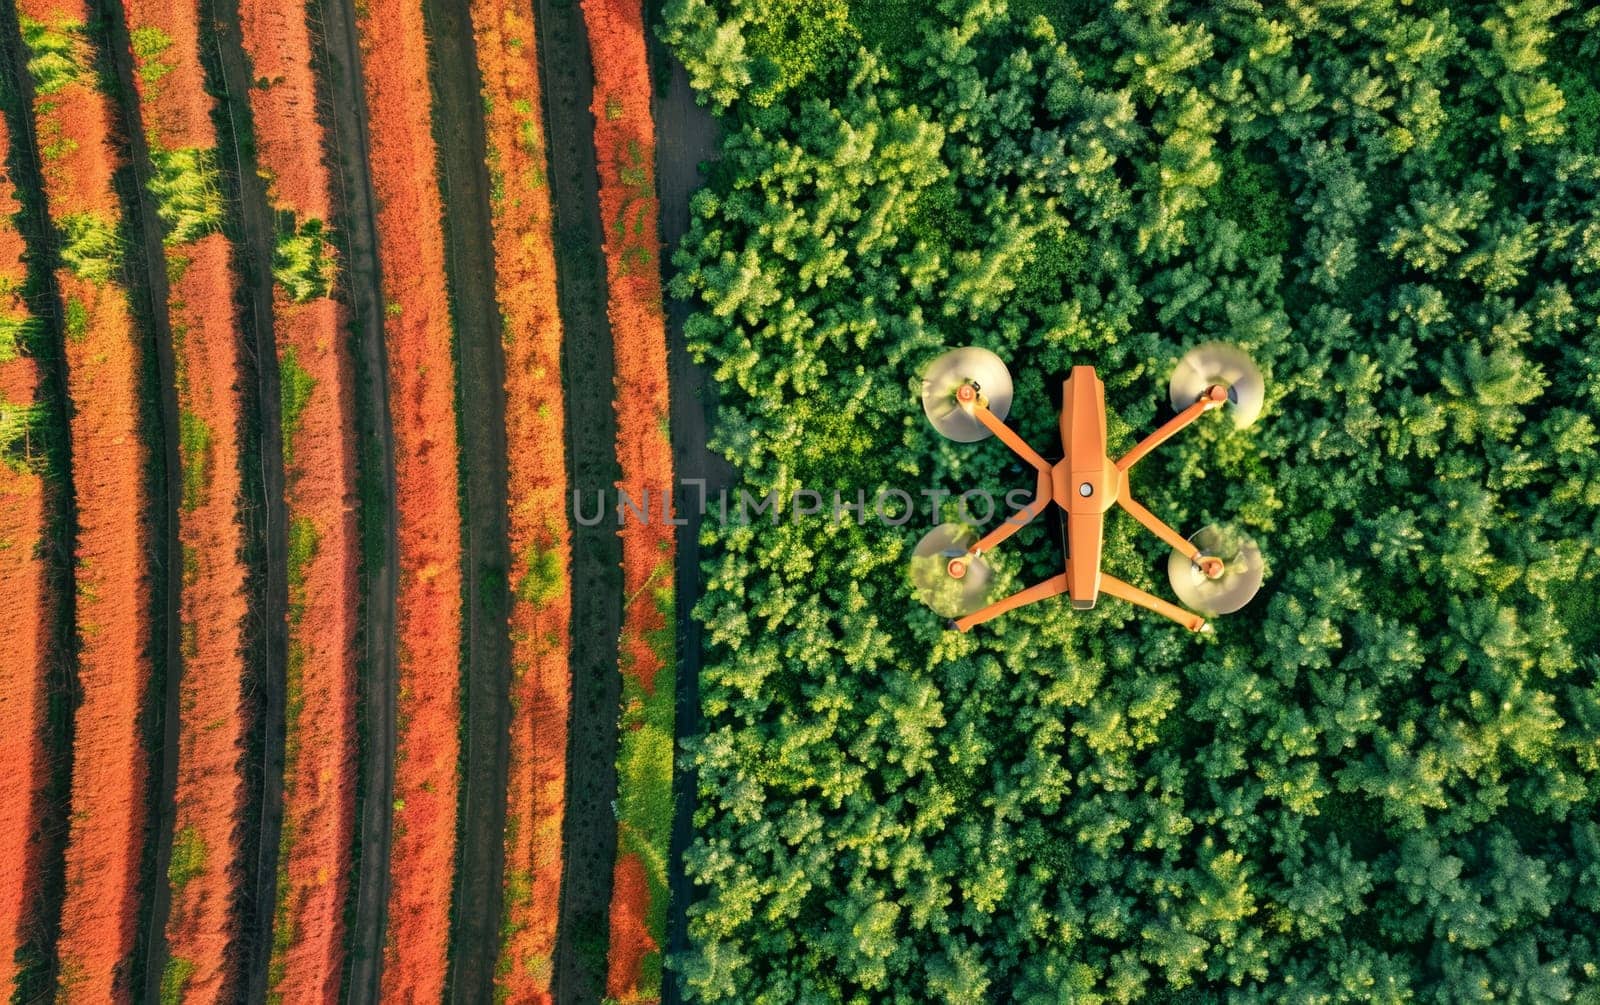 From above, a drone hovers over the contrasting rows of a lush green forest, the technology of man overseeing the wild patterns of nature. View offers a fresh perspective on forestry and surveillance. by sfinks